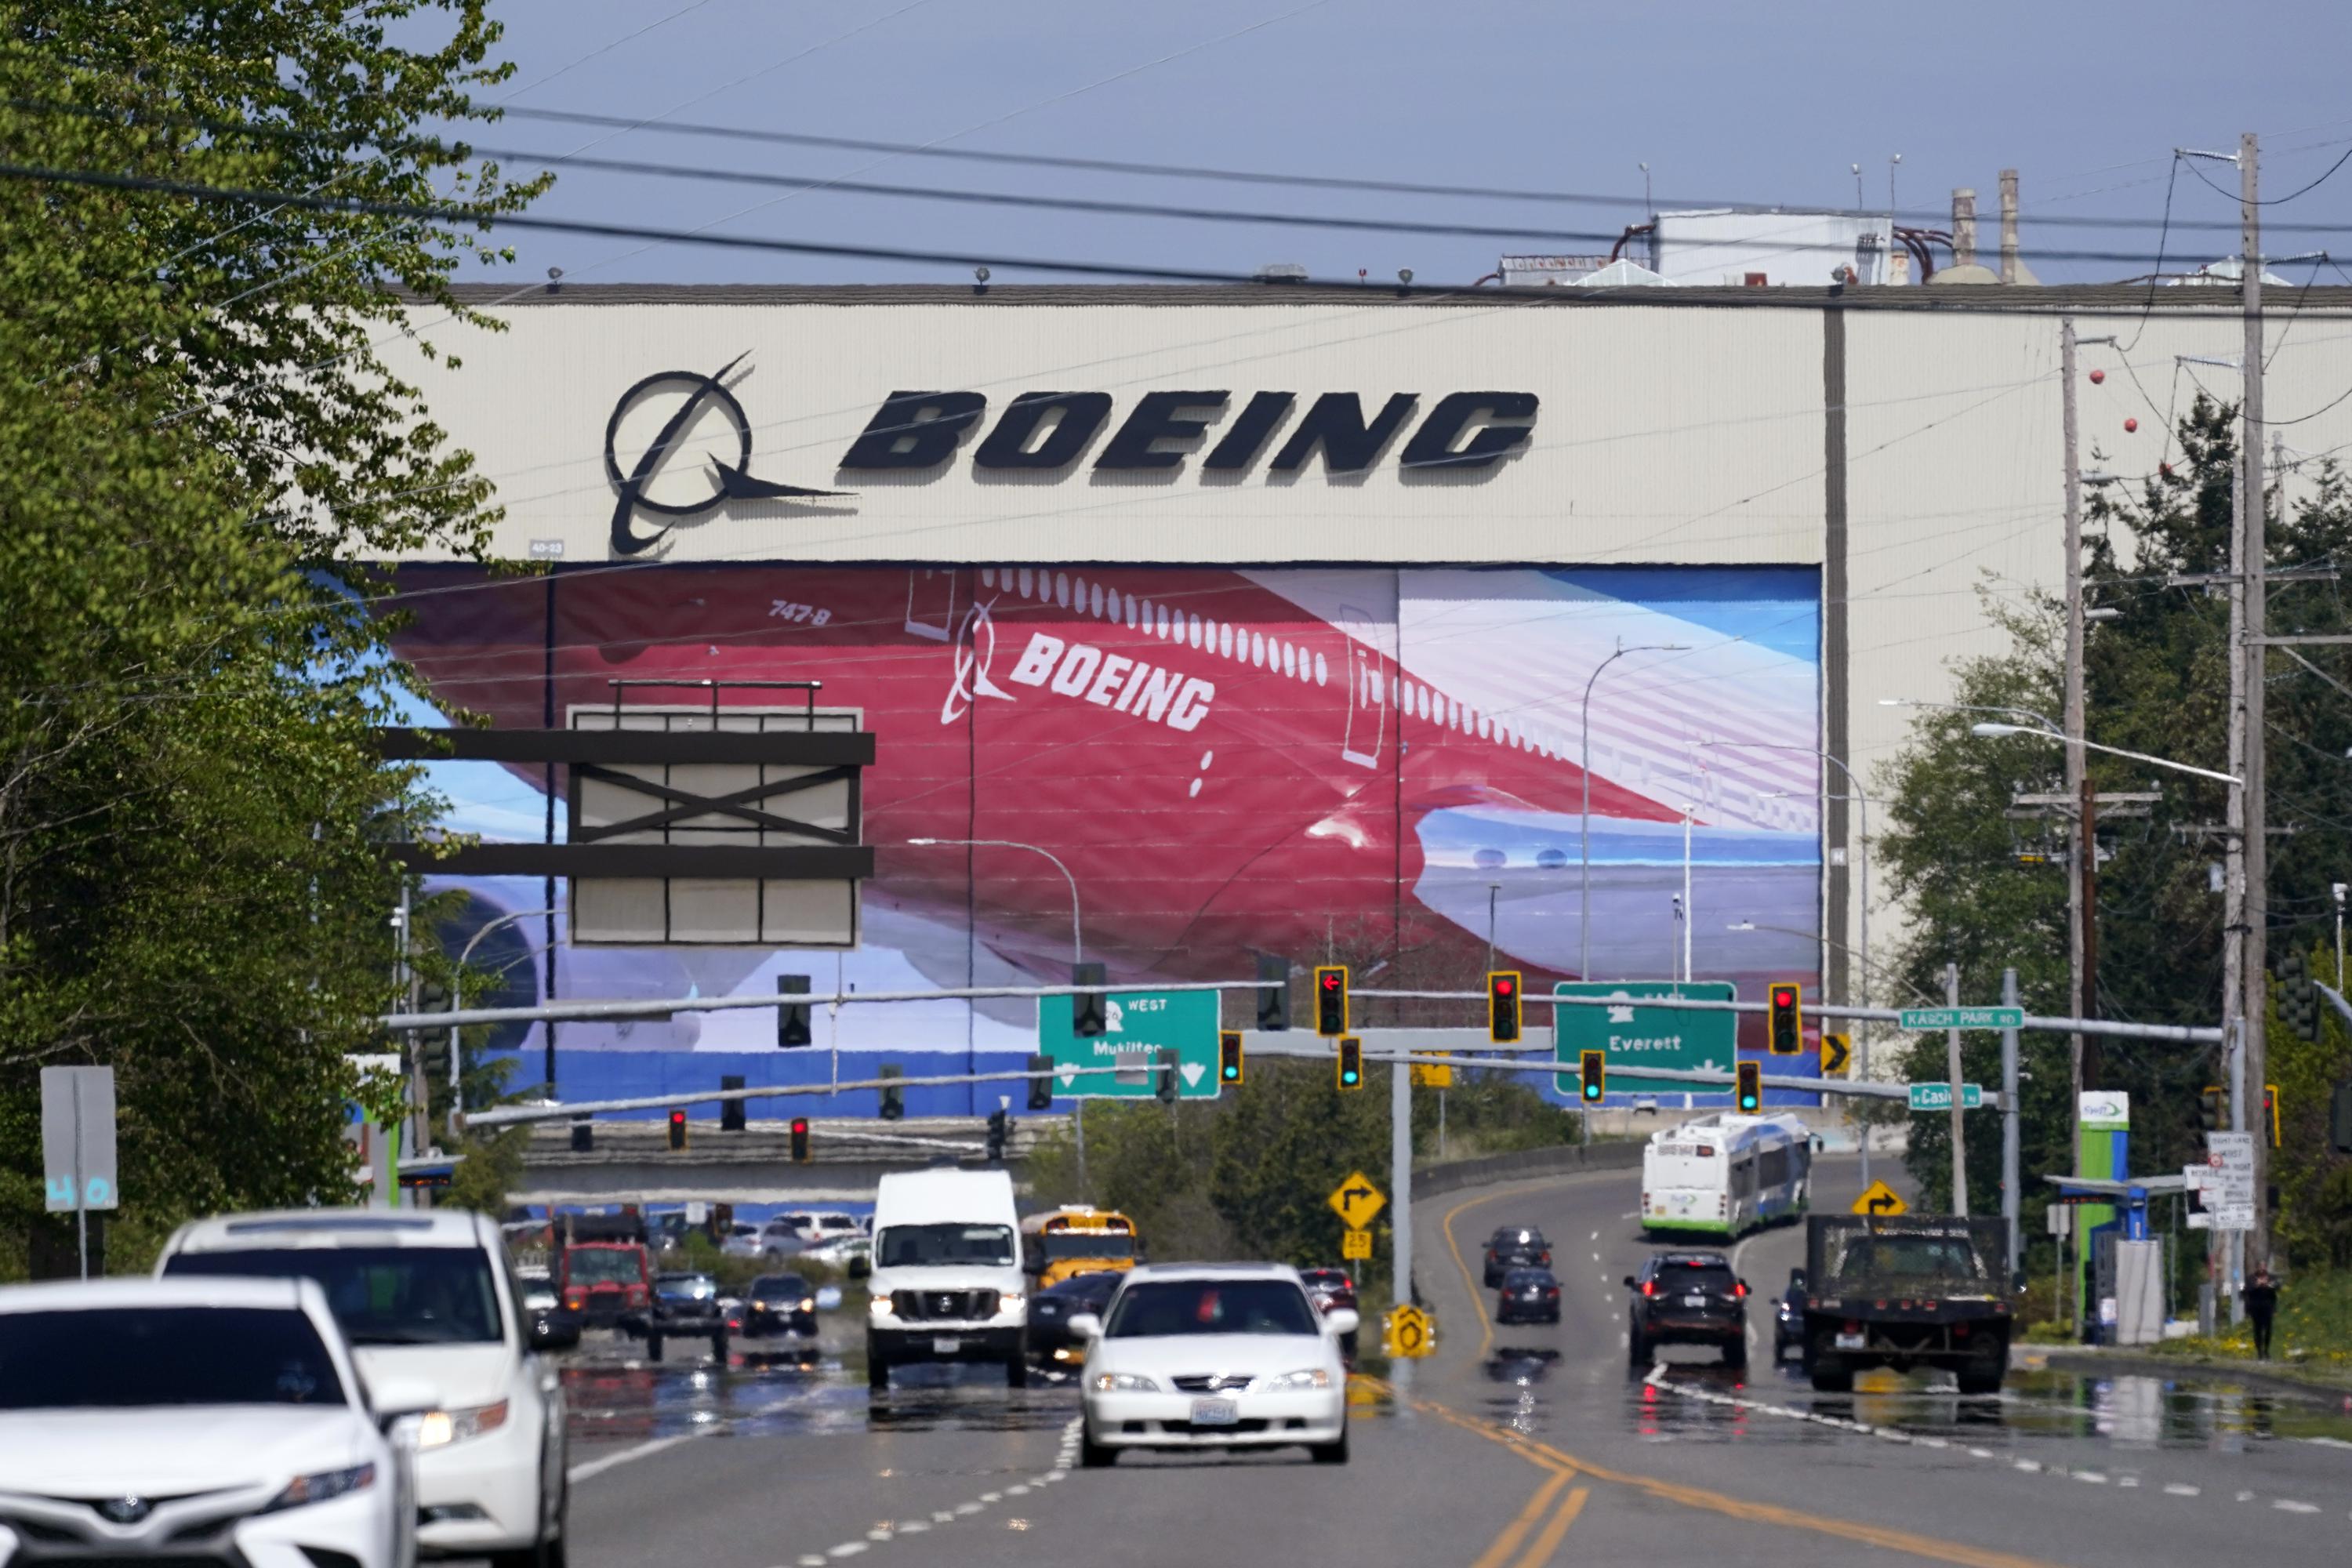 About 2,500 Boeing workers are on strike after rejecting the deal